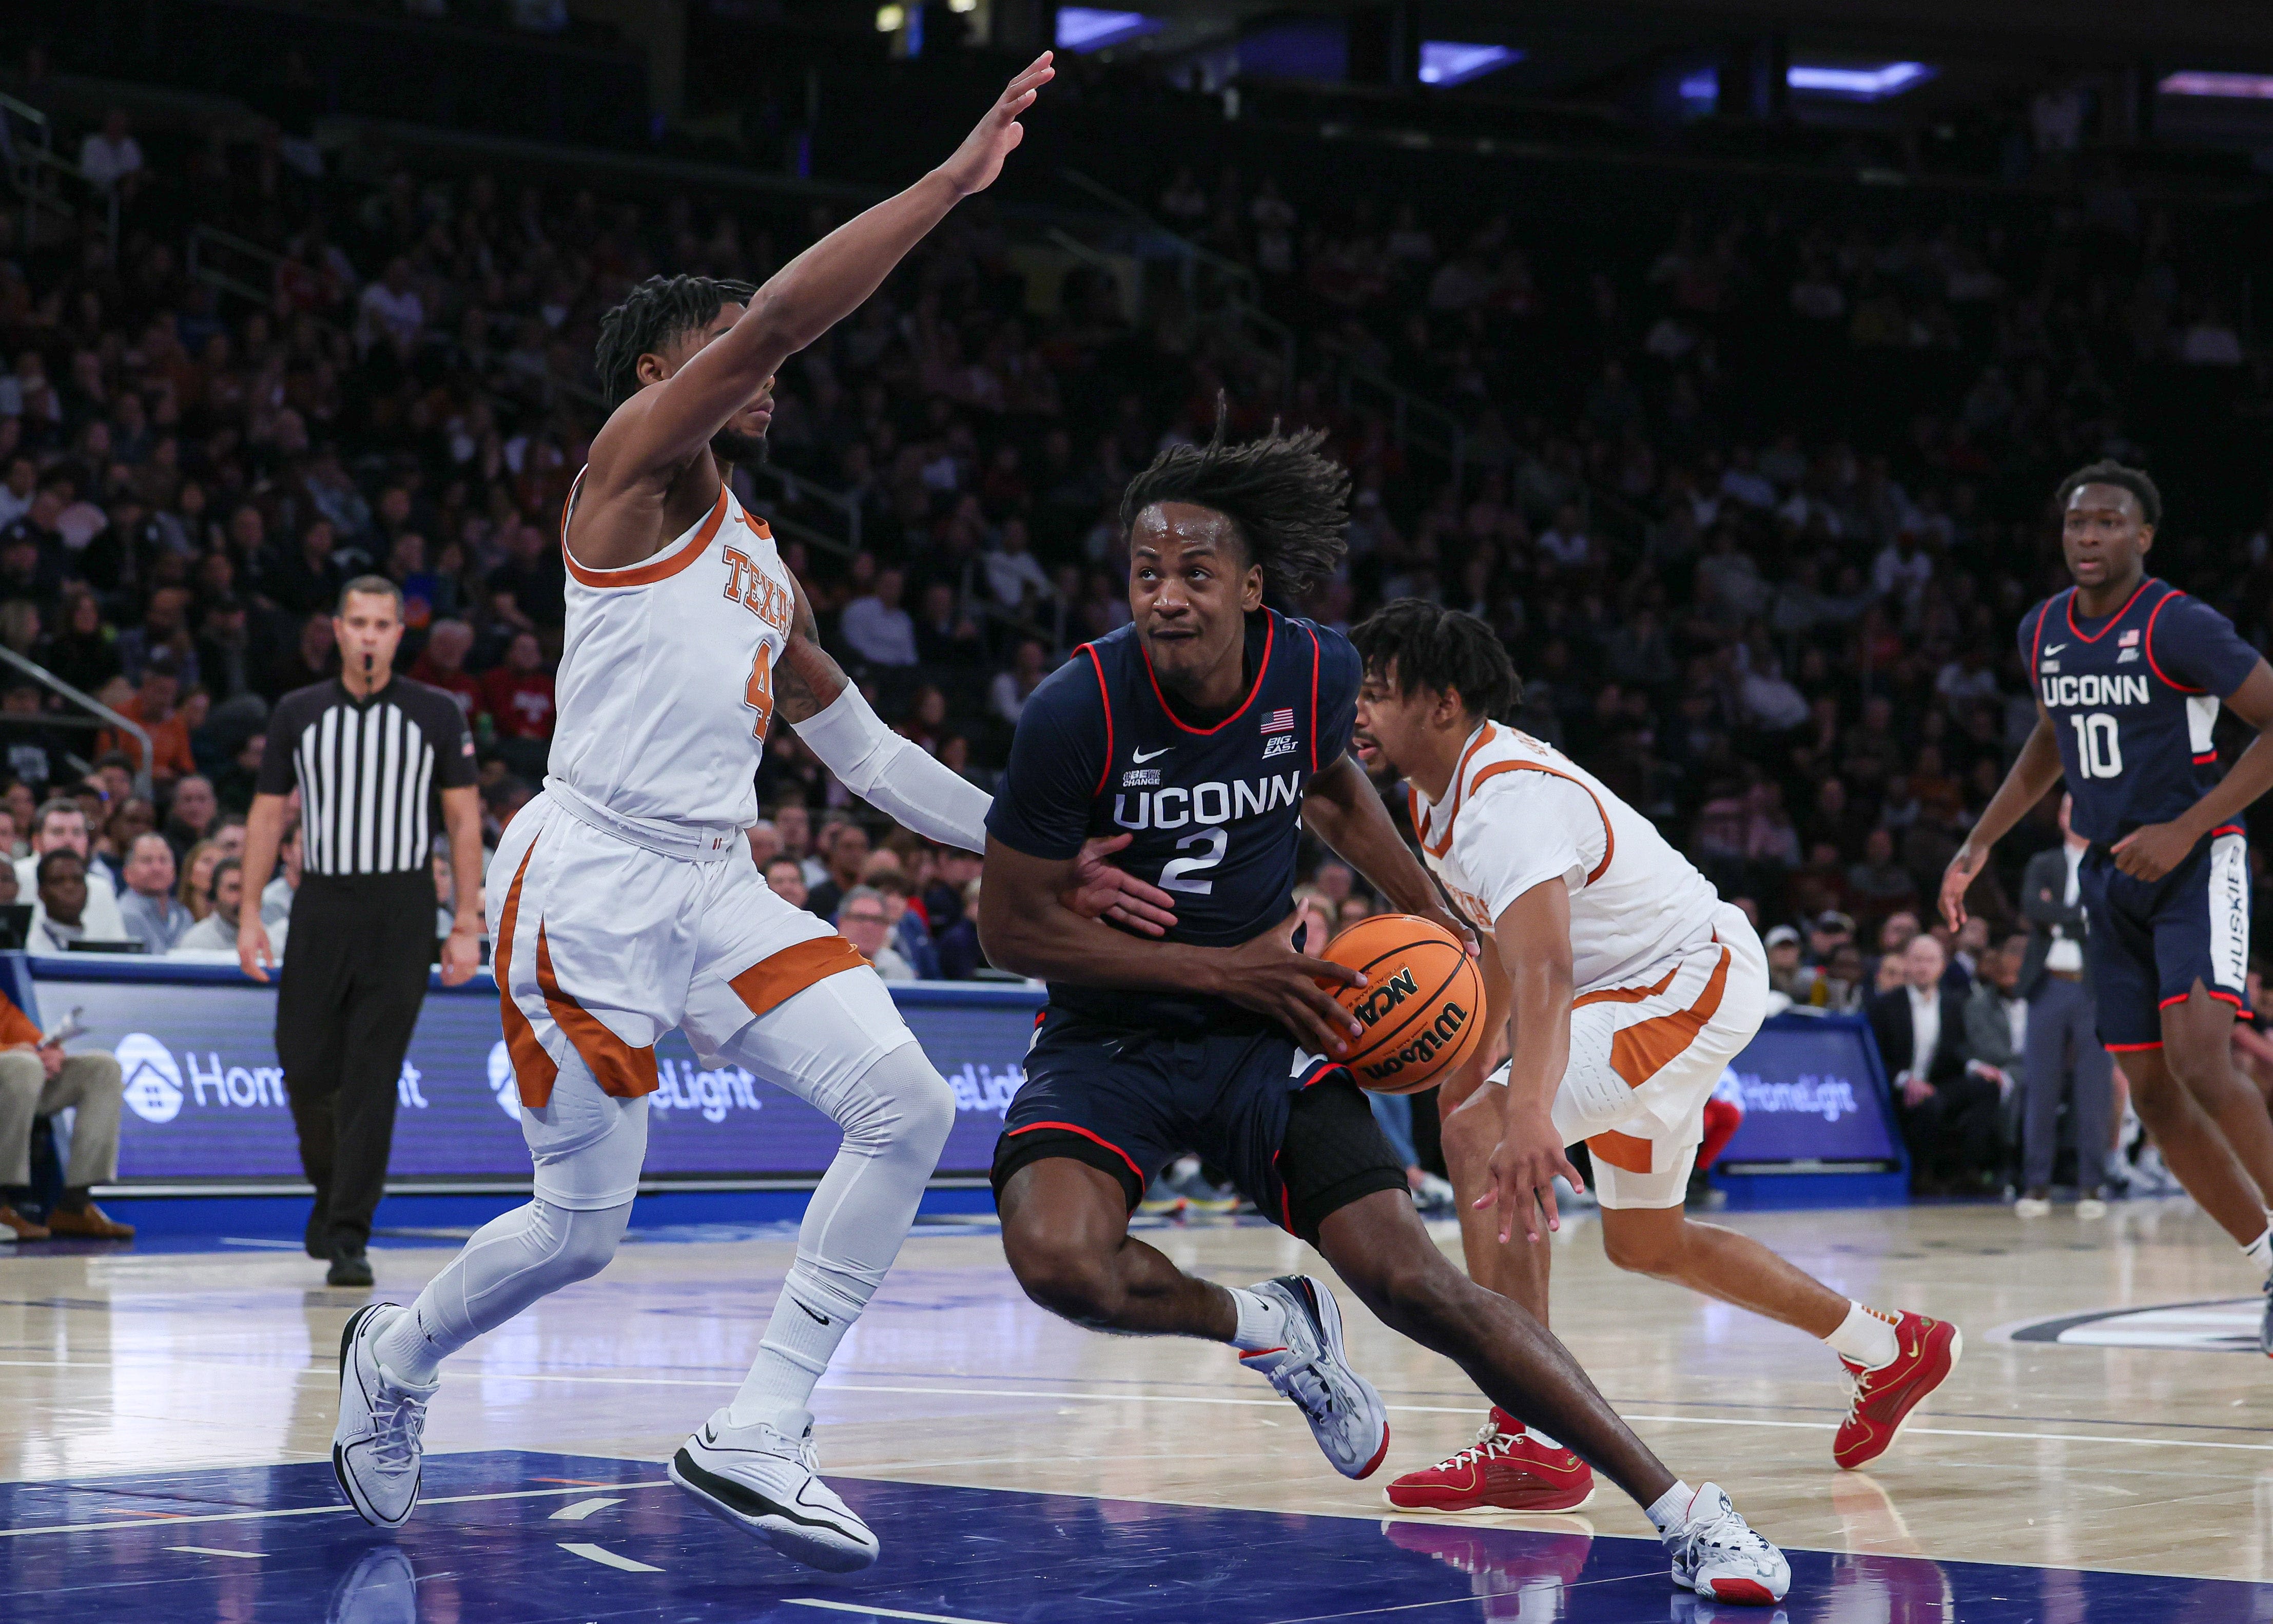 Source confirms that Texas basketball will host defending national champion UConn Dec. 8